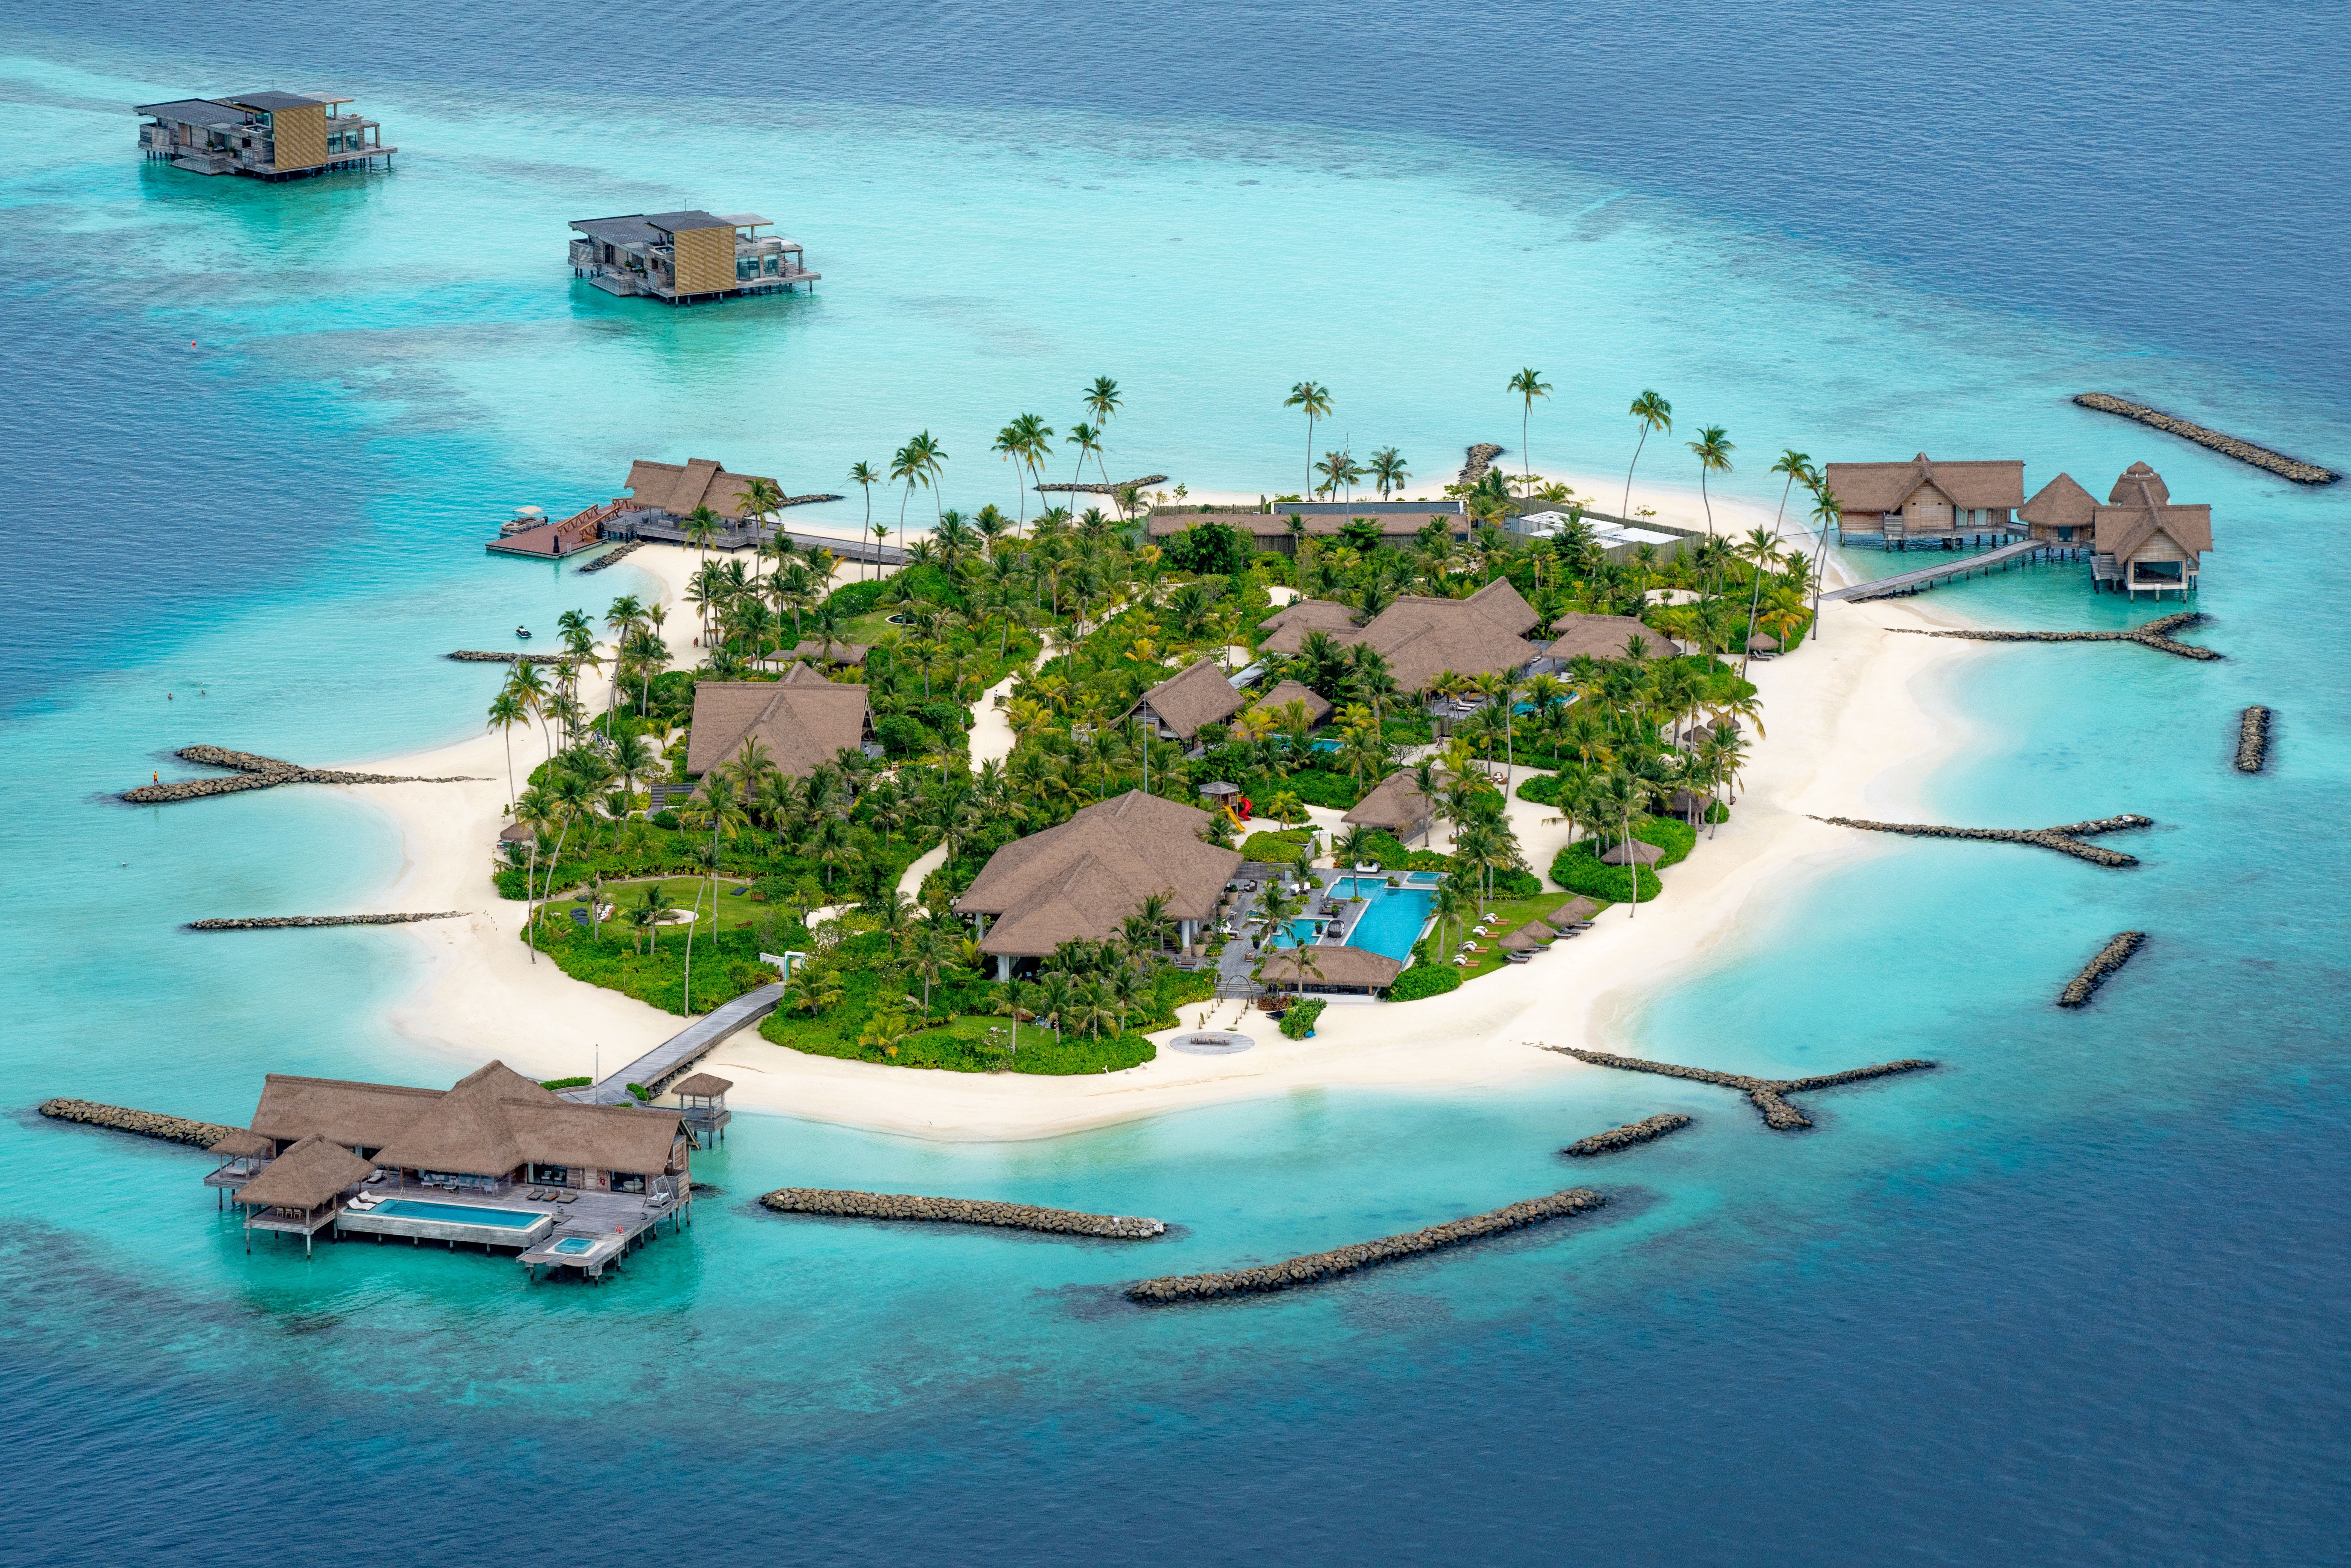 A resort on an island in the middle of a water body in the Maldives